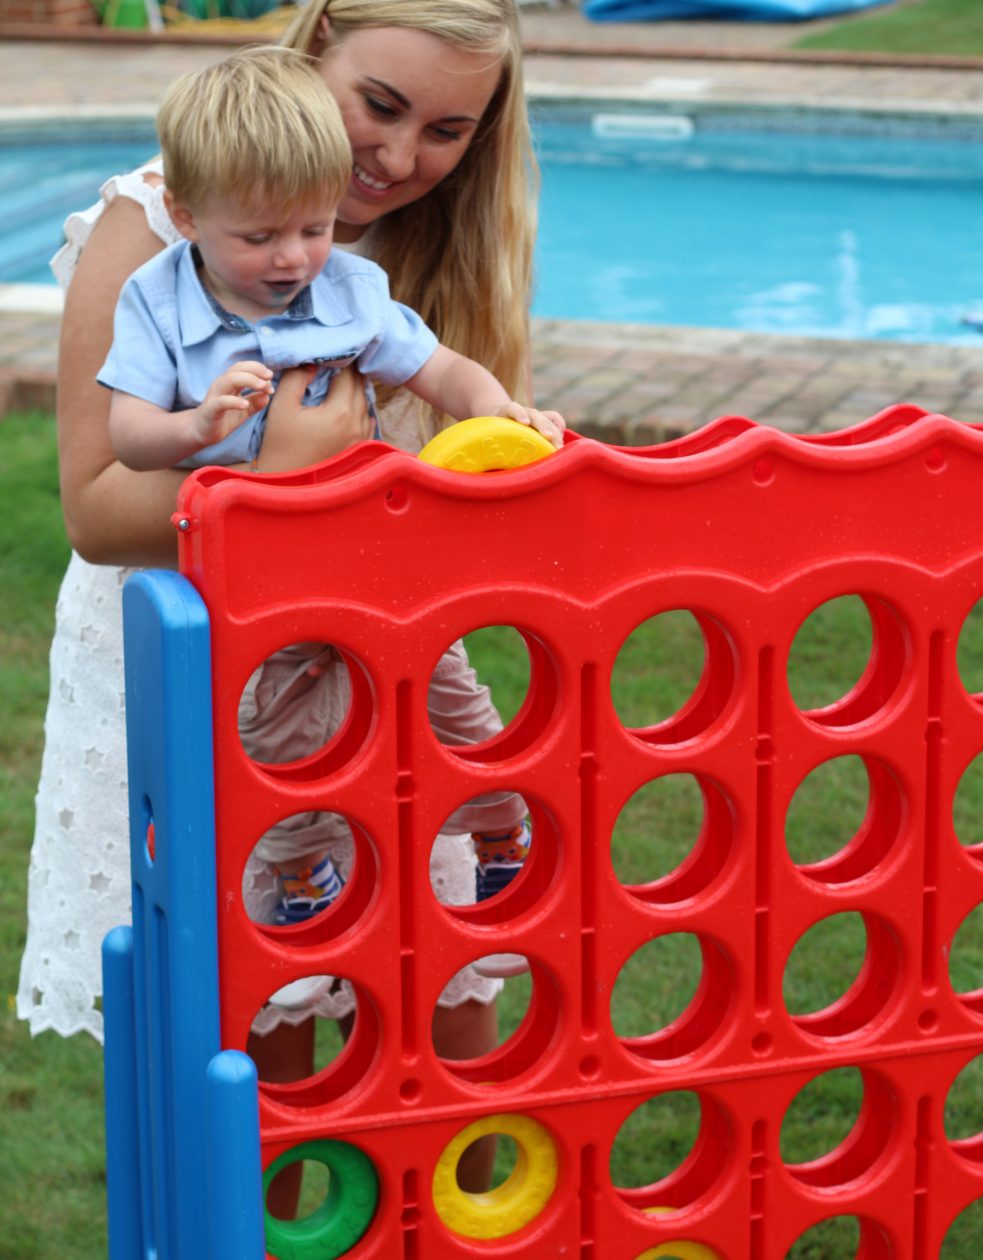 giant connect four hire